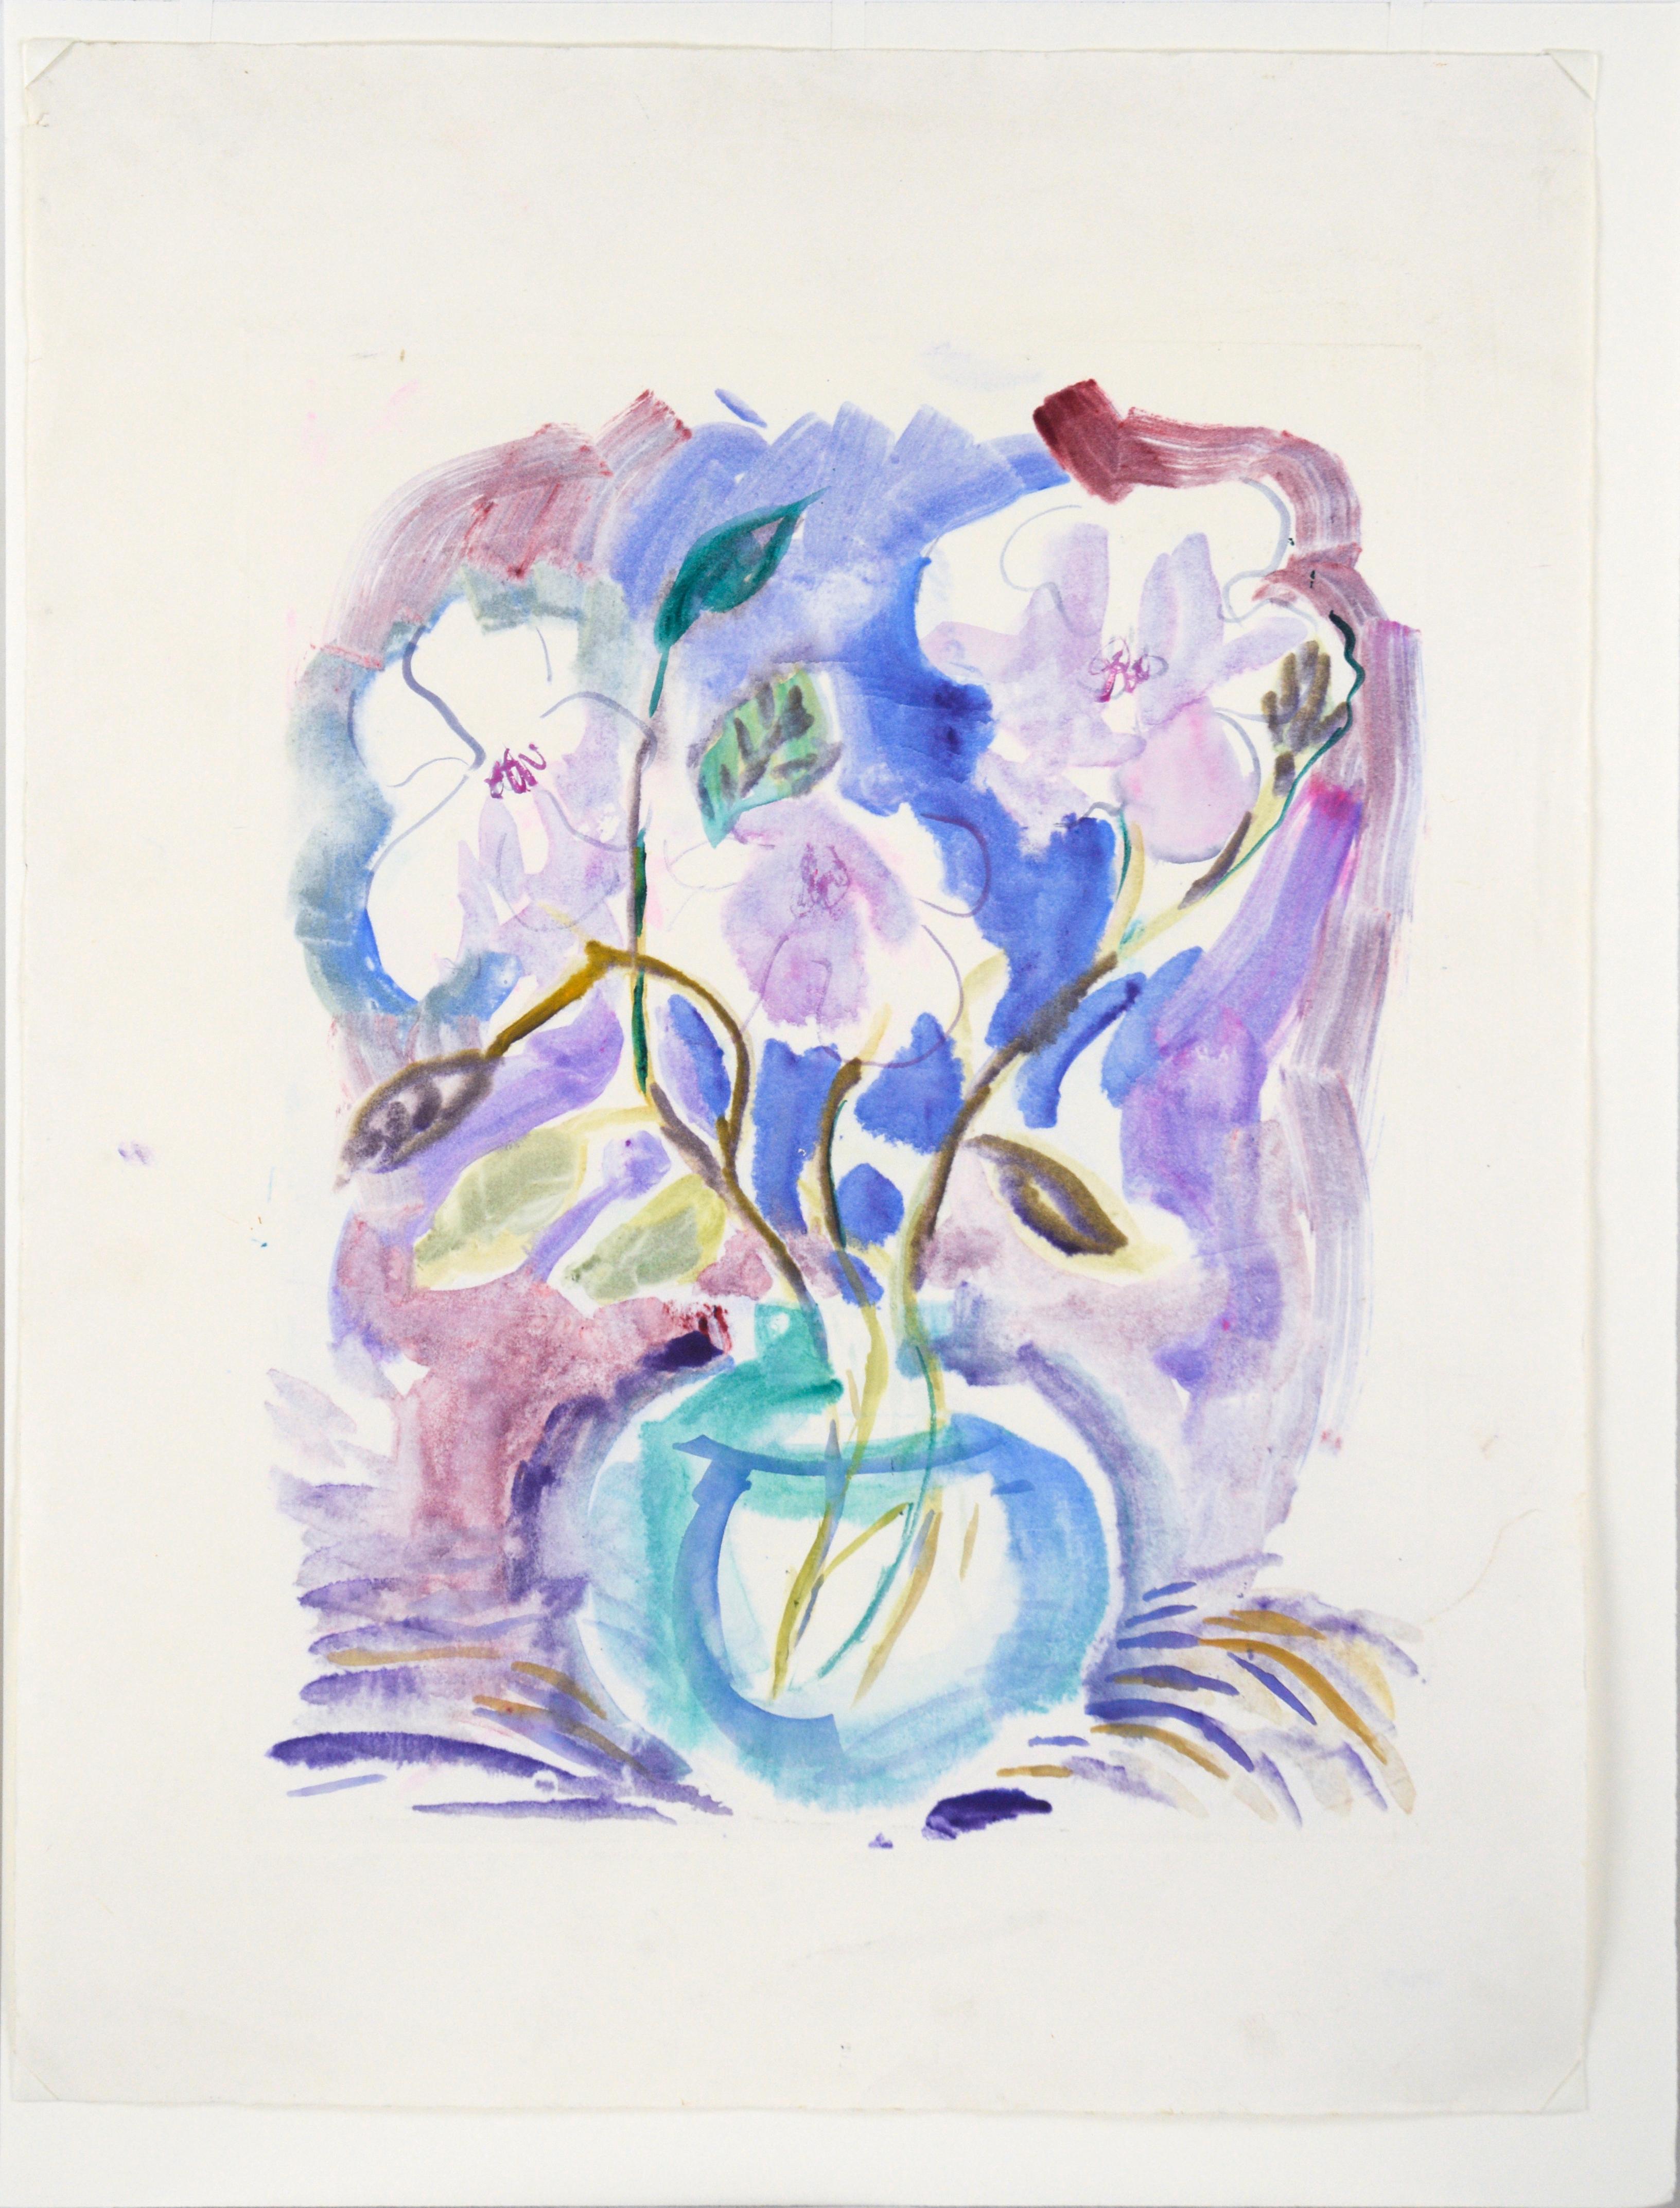 Vibrant and dynamic monoprint by David Stephens (American, 20th Century). Several white and purple flowers sit in a vase with a few other plant cuttings. The background is filled with vibrant blues and purples.

Unsigned, but was acquired with a